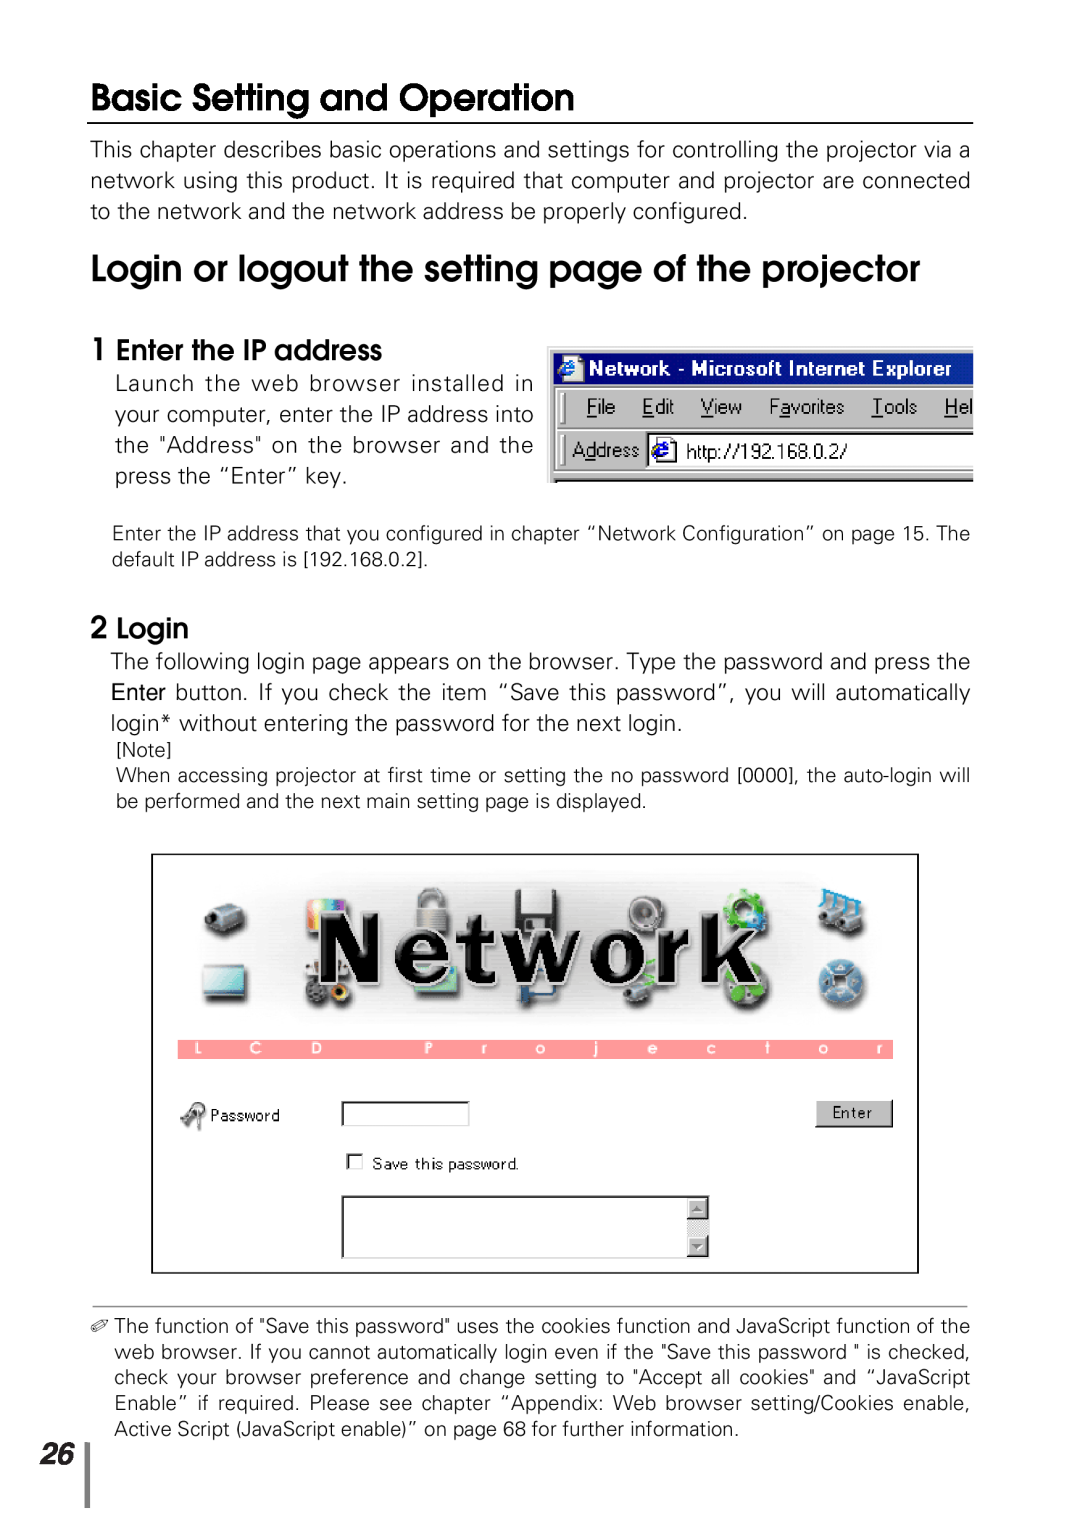 Sanyo POA-PN10 Basic Setting and Operation, Login or logout the setting page of the projector, Enter the IP address 